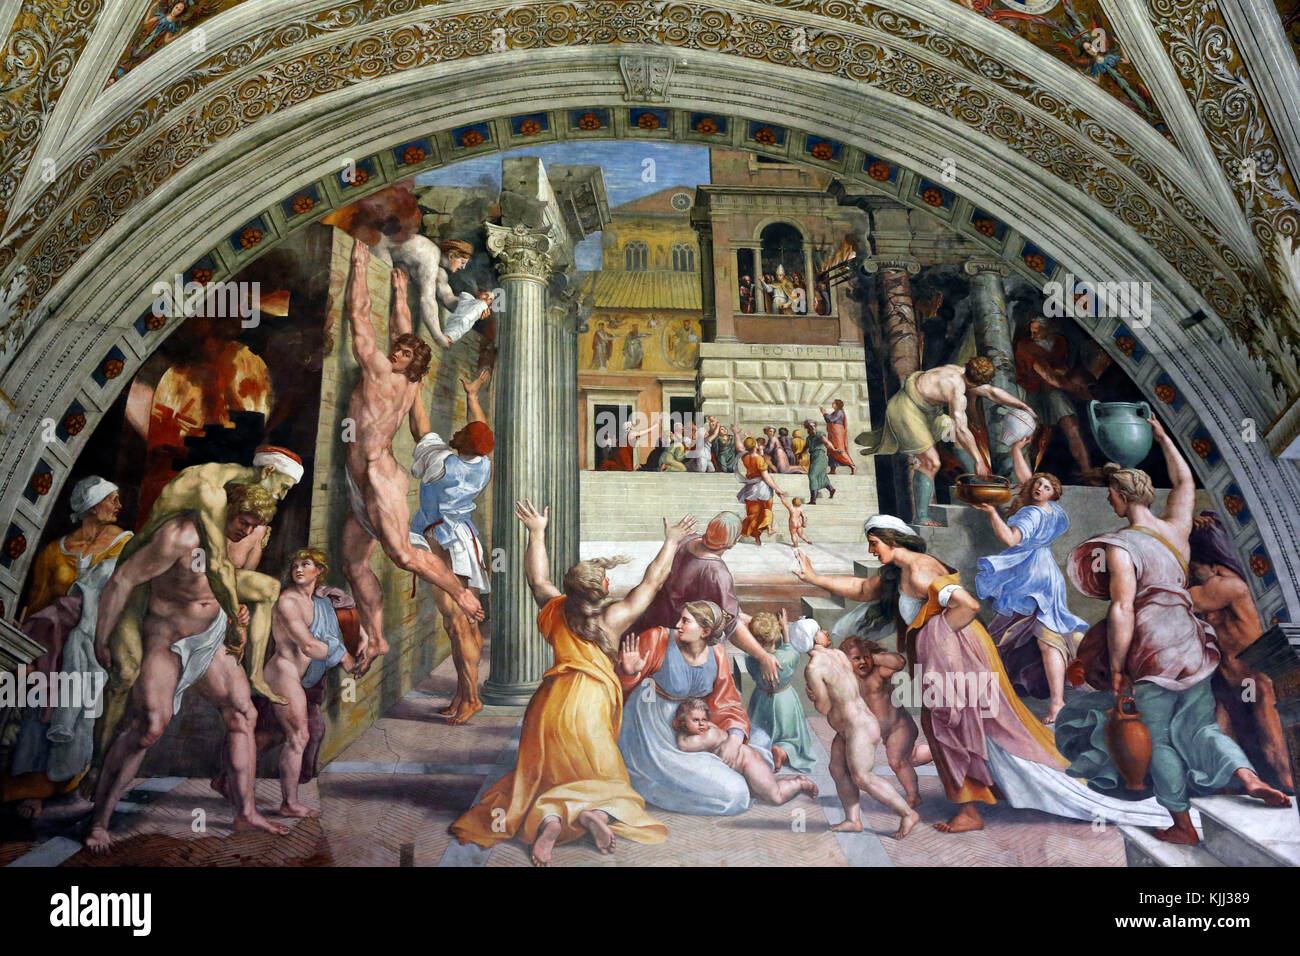 Vatican museums, Rome. Raphael's rooms. Fire in the Borgo. Italy. Stock Photo